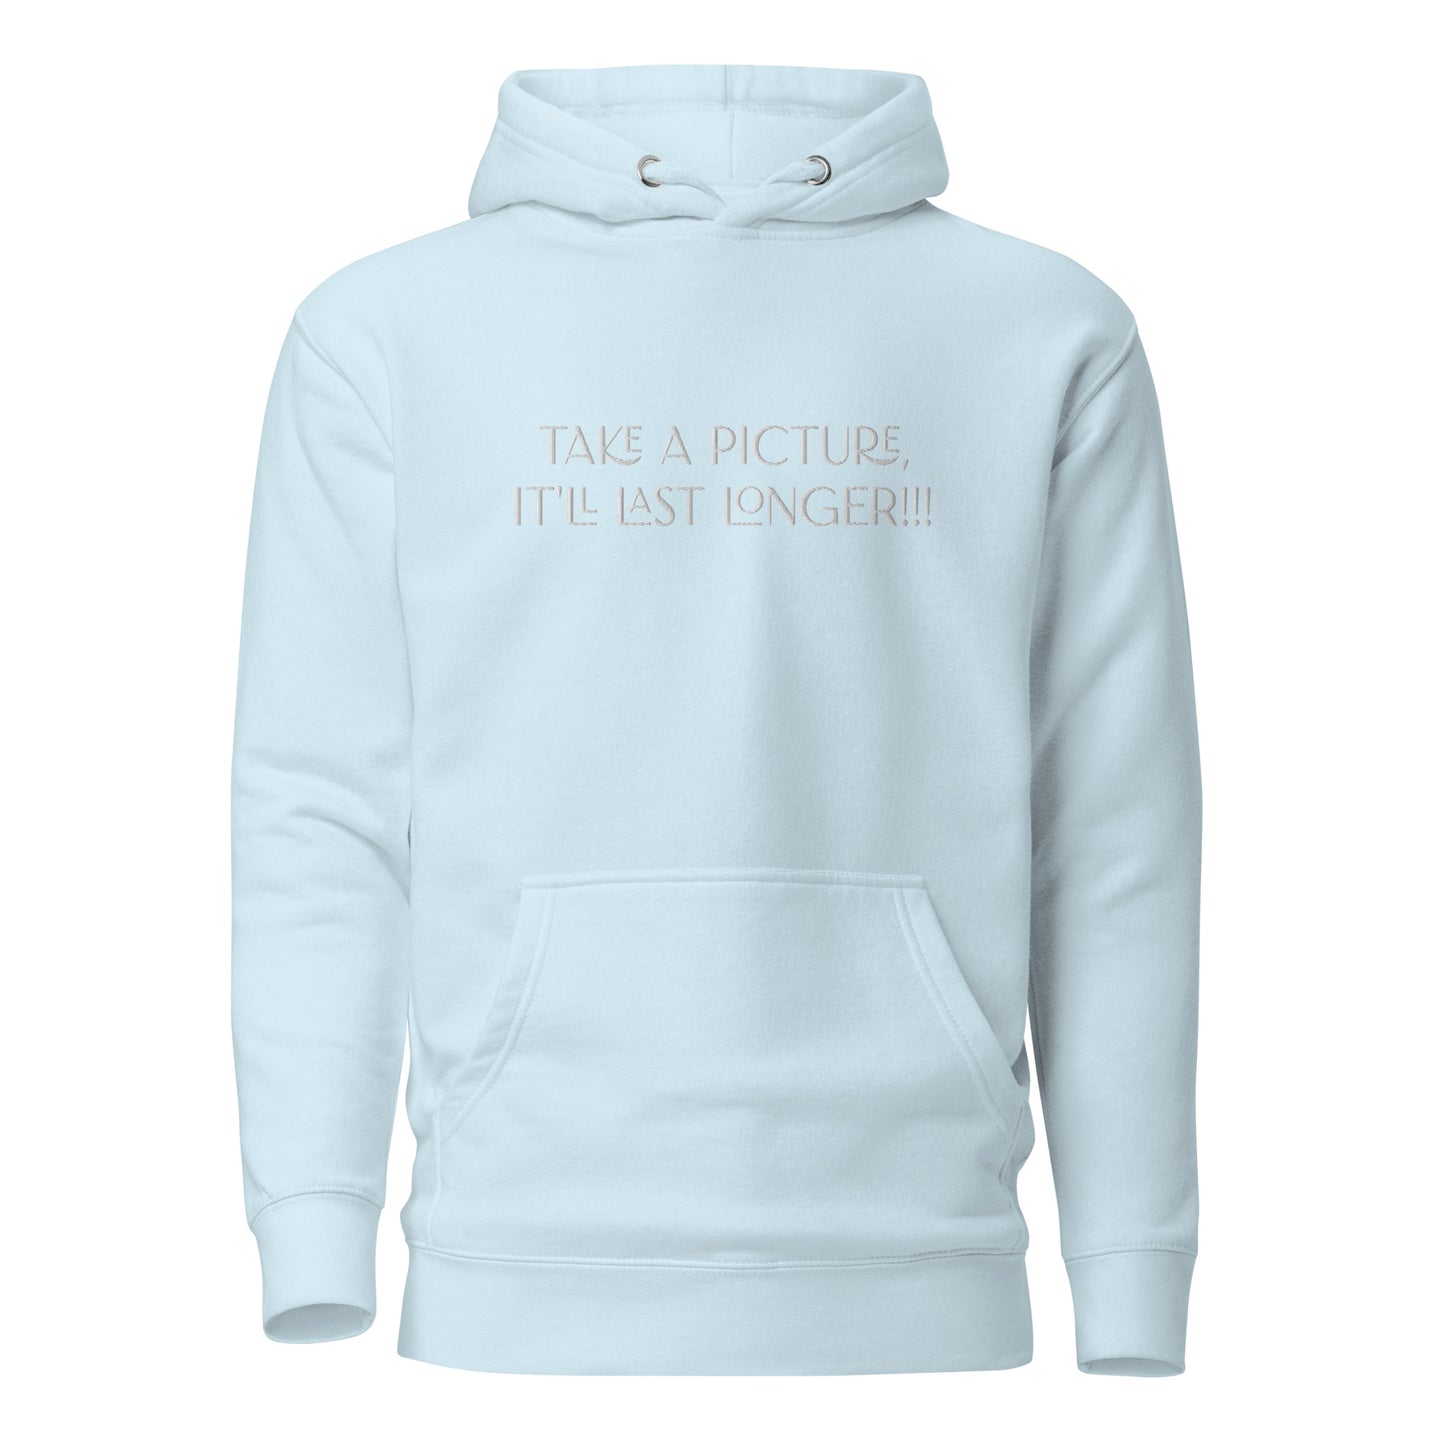 A'Savoir Embroidery Hoodie - "Take a picture"